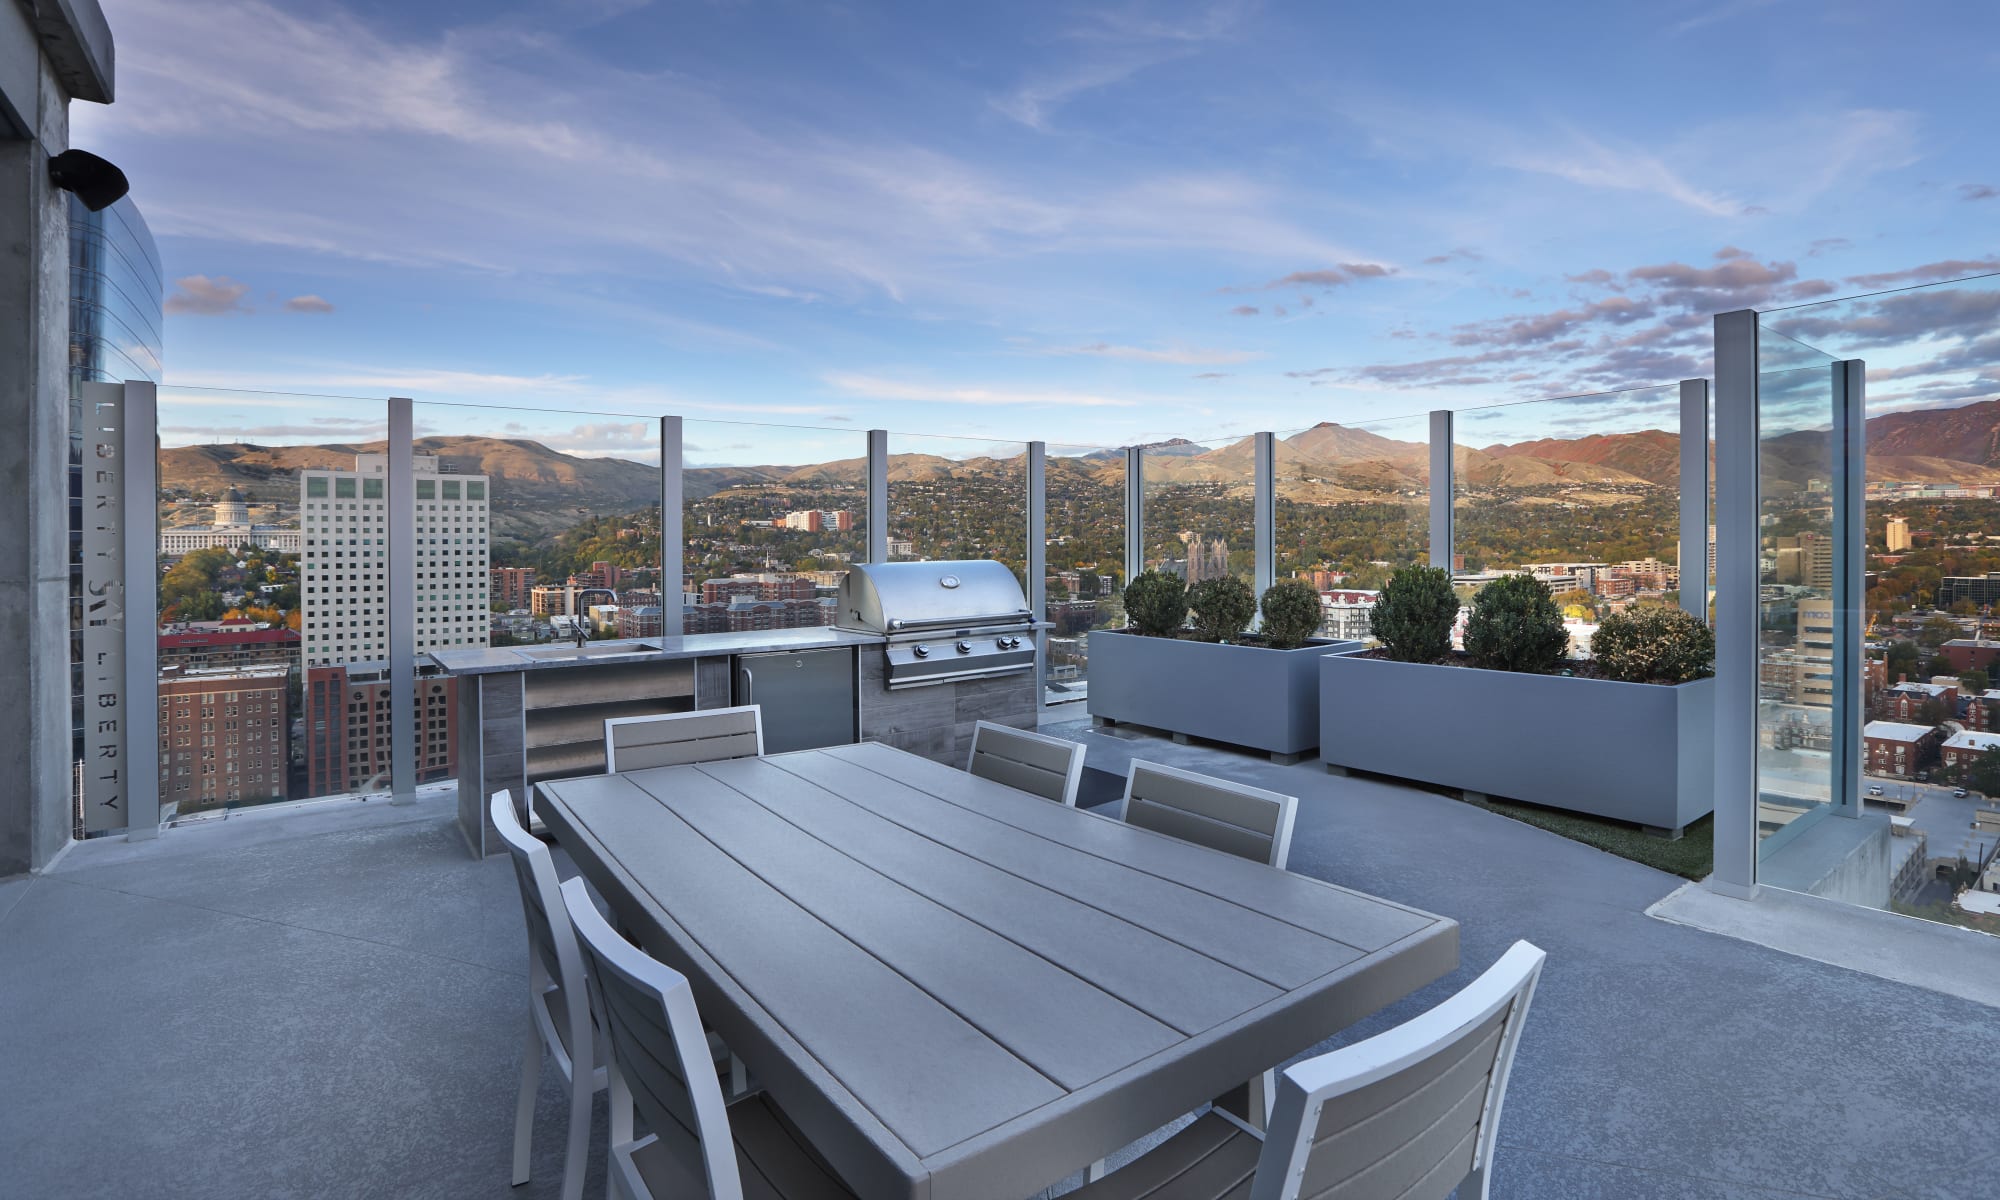 Liberty Sky, tower of luxury apartments, is opening in Salt Lake City